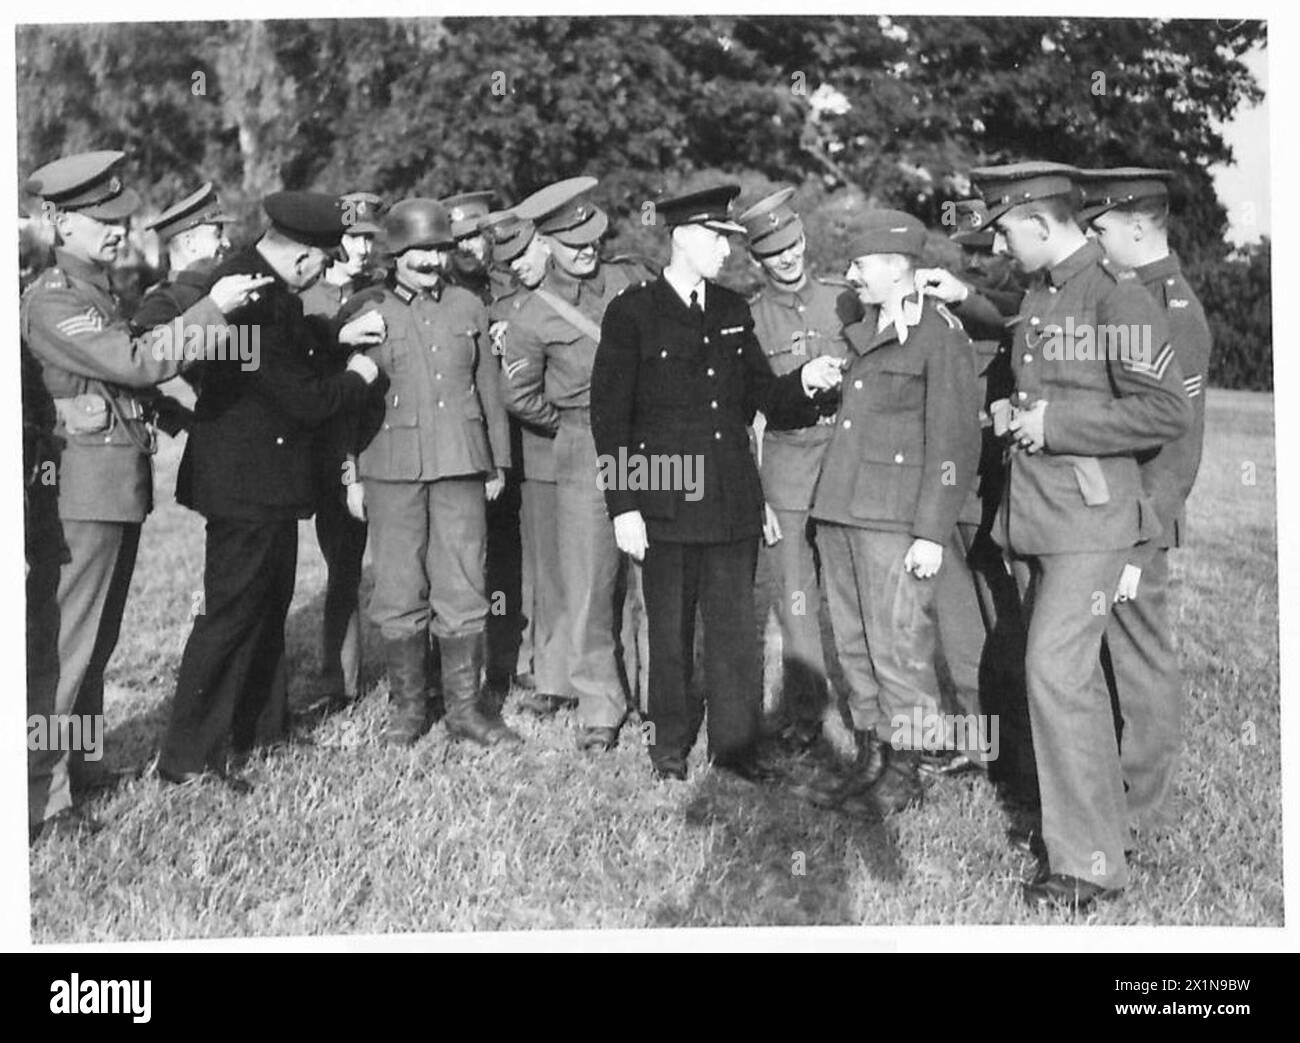 GERMAN PRISONERS INTERROGATION DEMONSTRATION - Members of the Civil and Military Police examining the uniforms after the demonstration, British Army Stock Photo